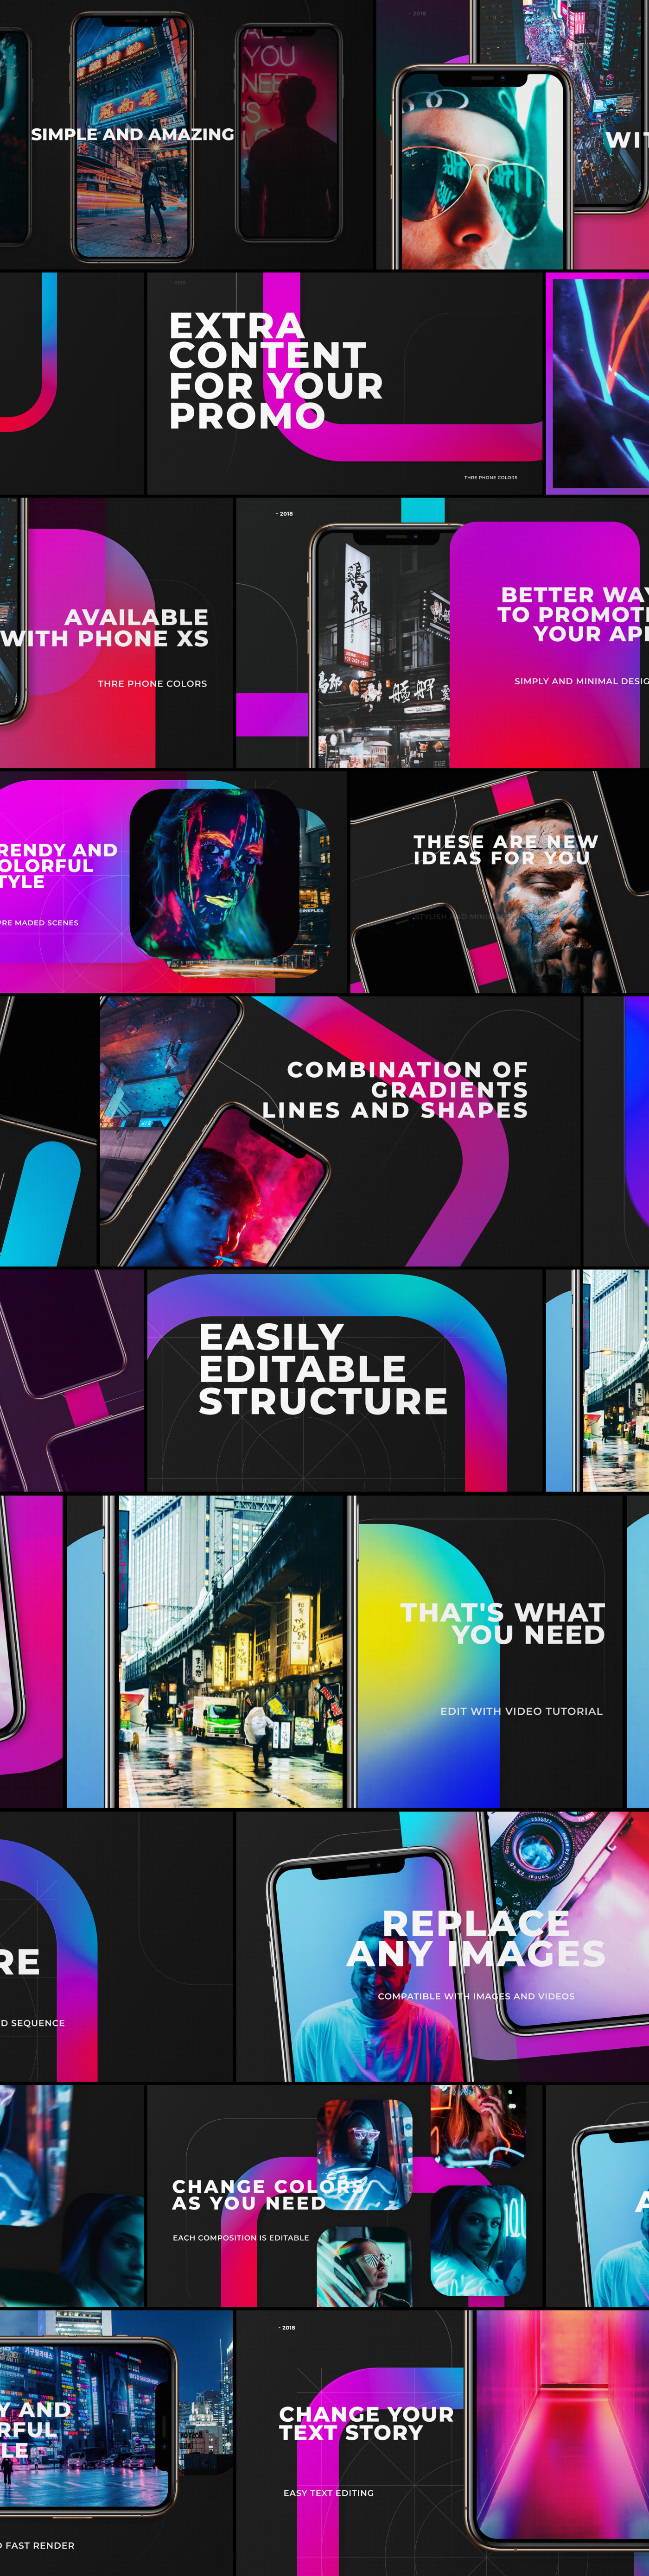 after effects template app promo design envato gradient mobile tranding videohive